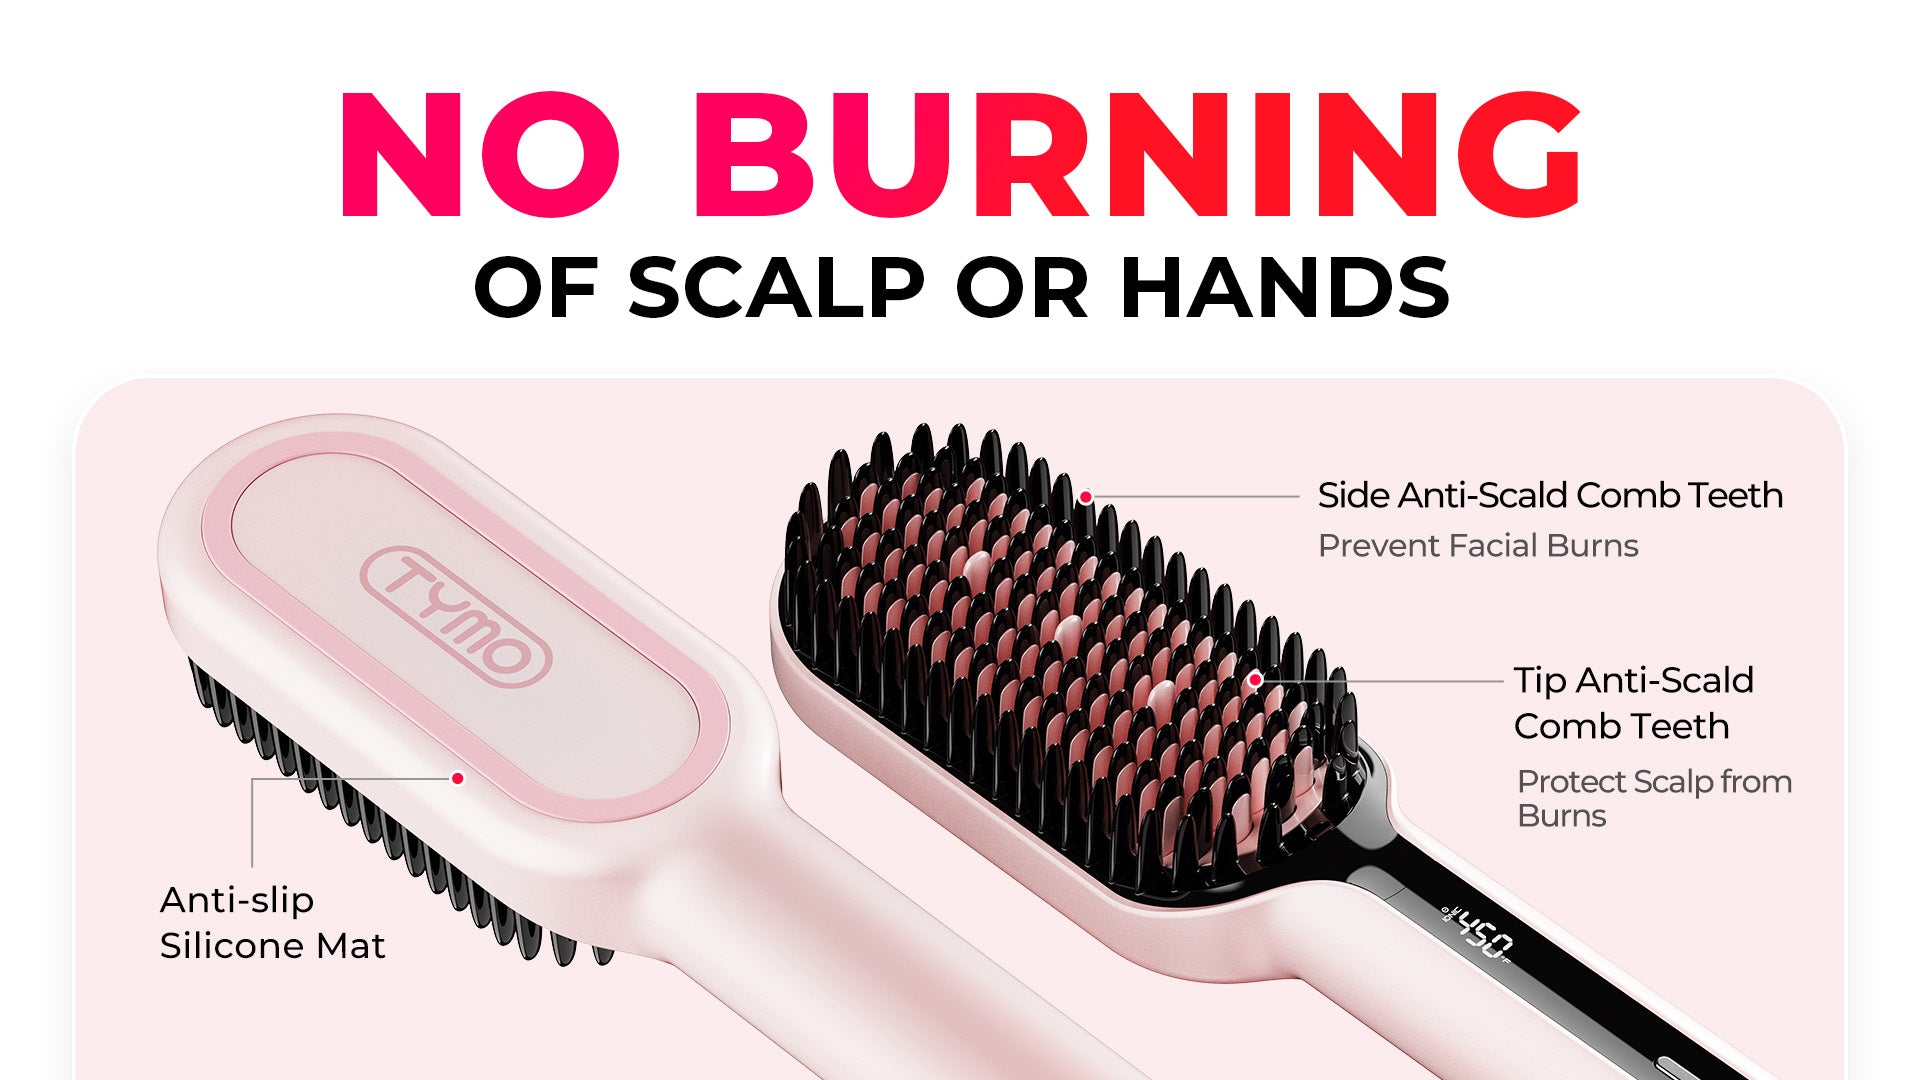 No Burning of Scalp or Hands